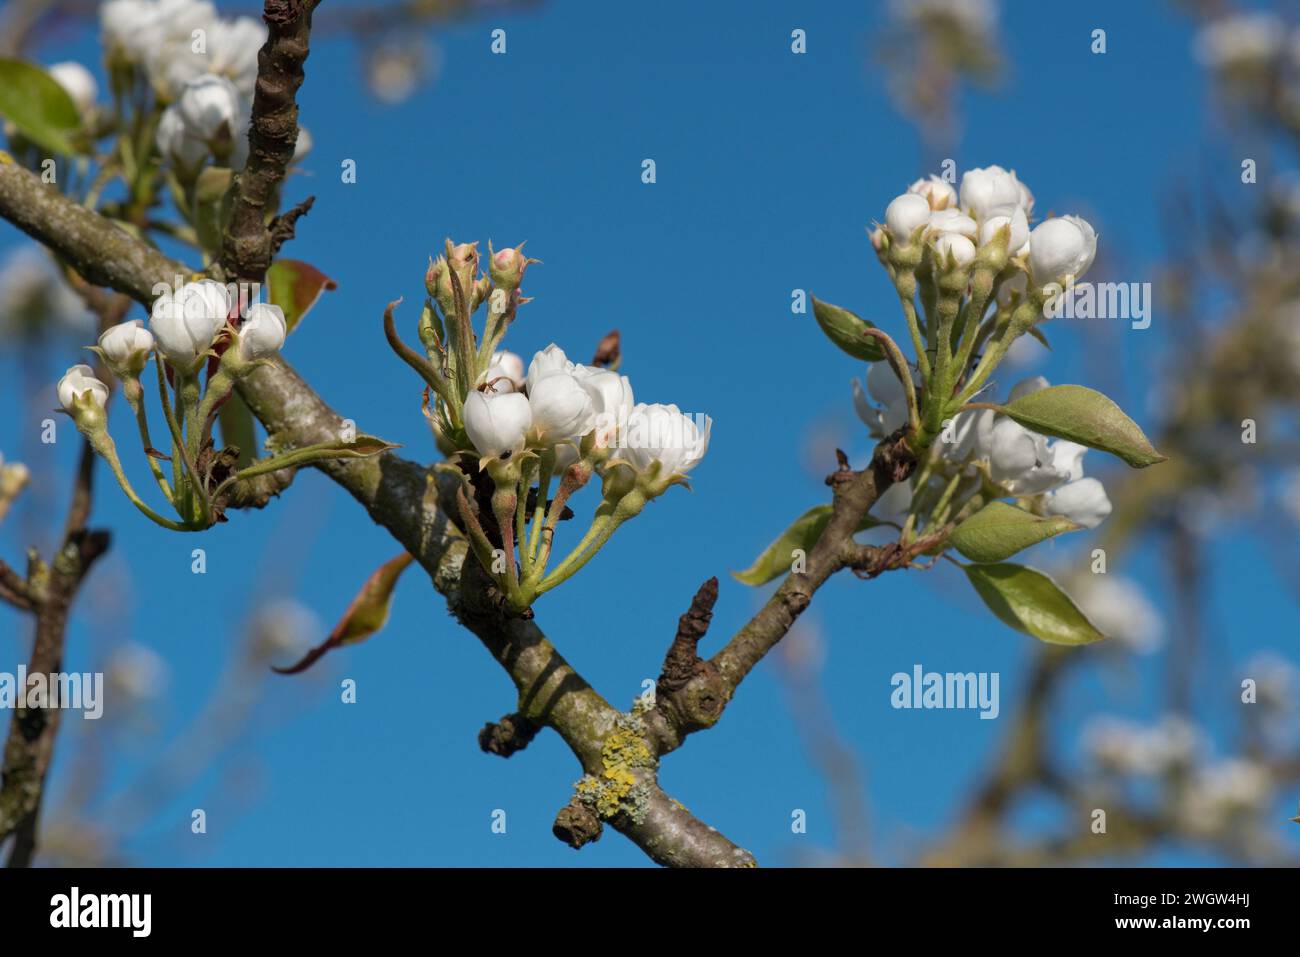 Opening buds of white conference pear blossom on an old orchard tree against an intense blue sky in springtime, Berkshire, April Stock Photo